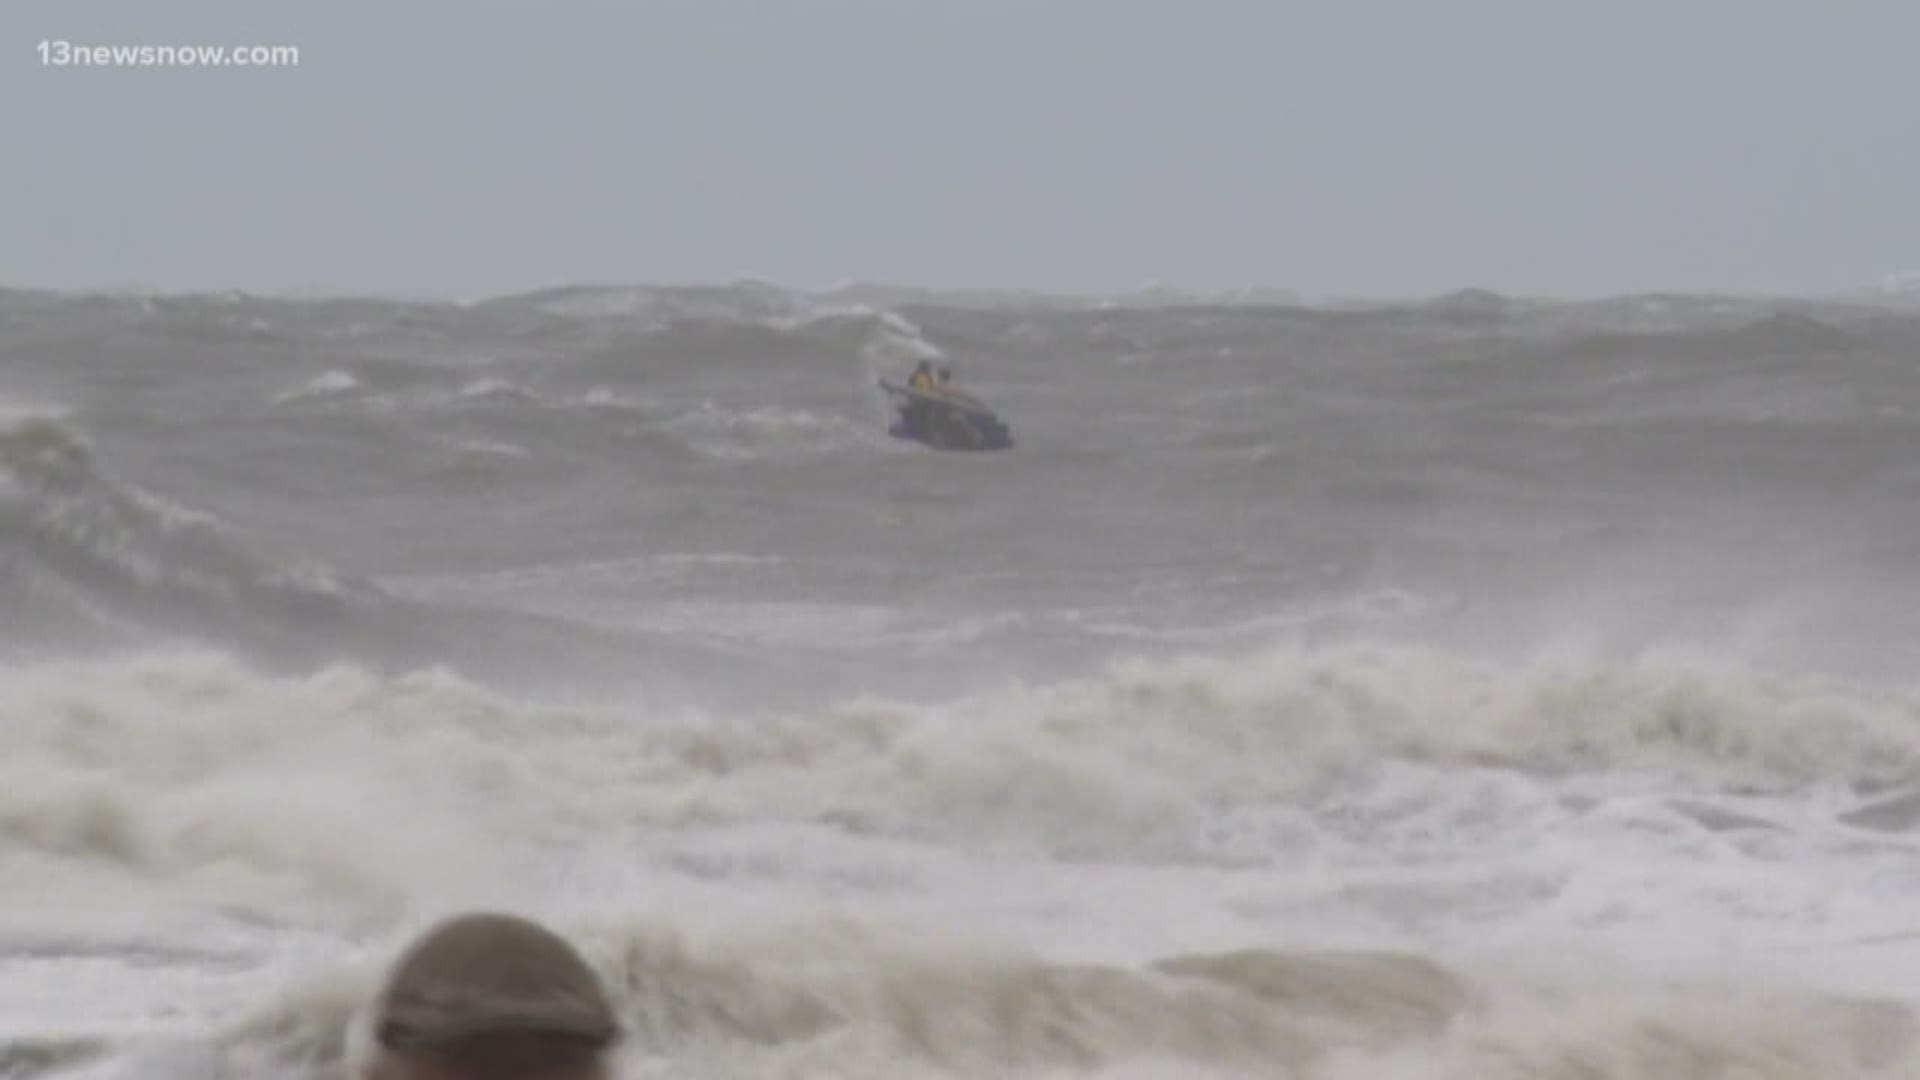 A couple people were seen taking their jet ski out into the water off Virginia Beach. Emergency officials stressed how dangerous it is to go into the water during a hurricane.